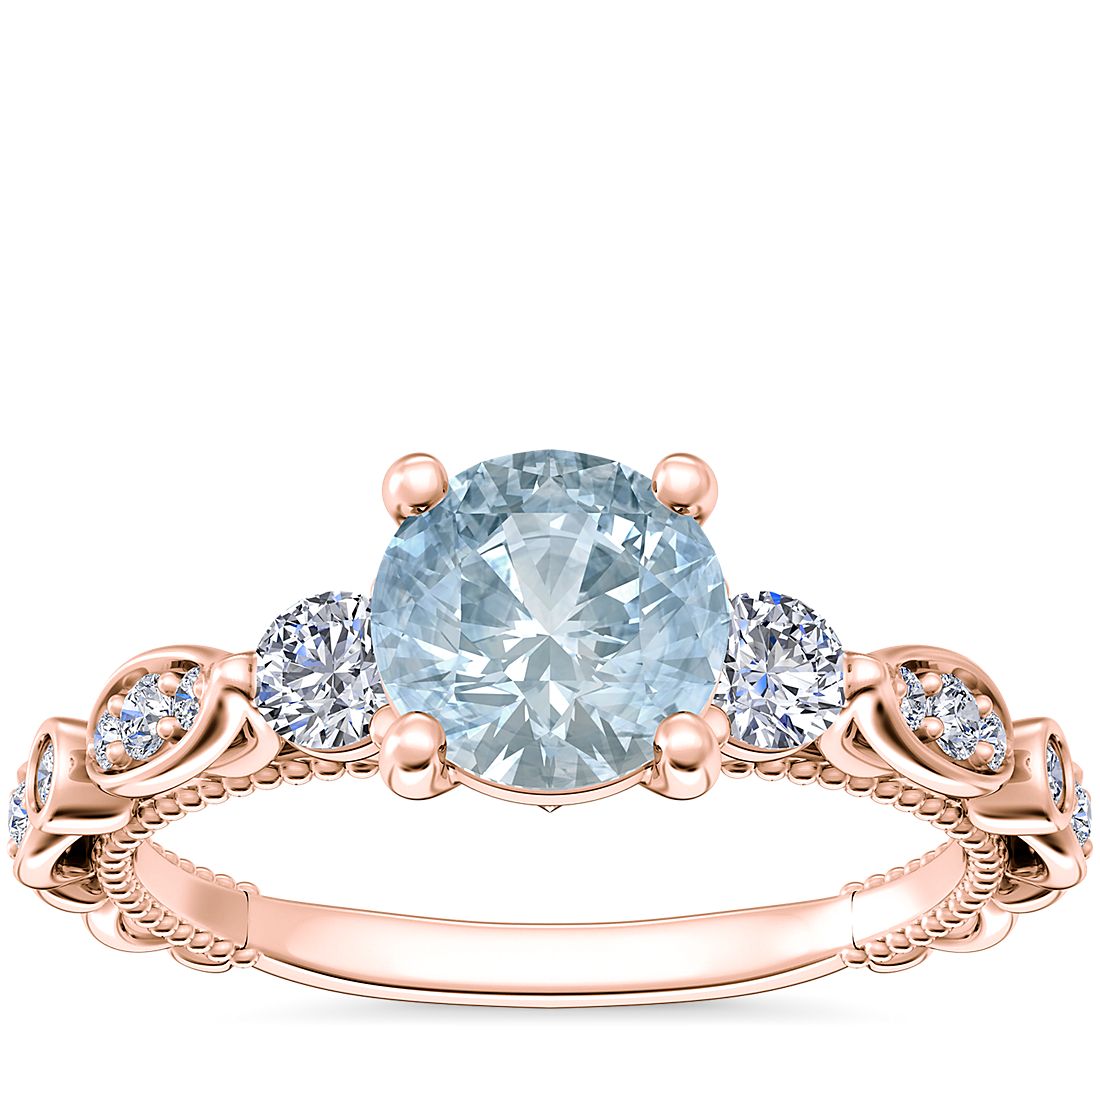 Floral Ellipse Diamond Cathedral Engagement Ring with Round Aquamarine in 14k Rose Gold (6.5mm)